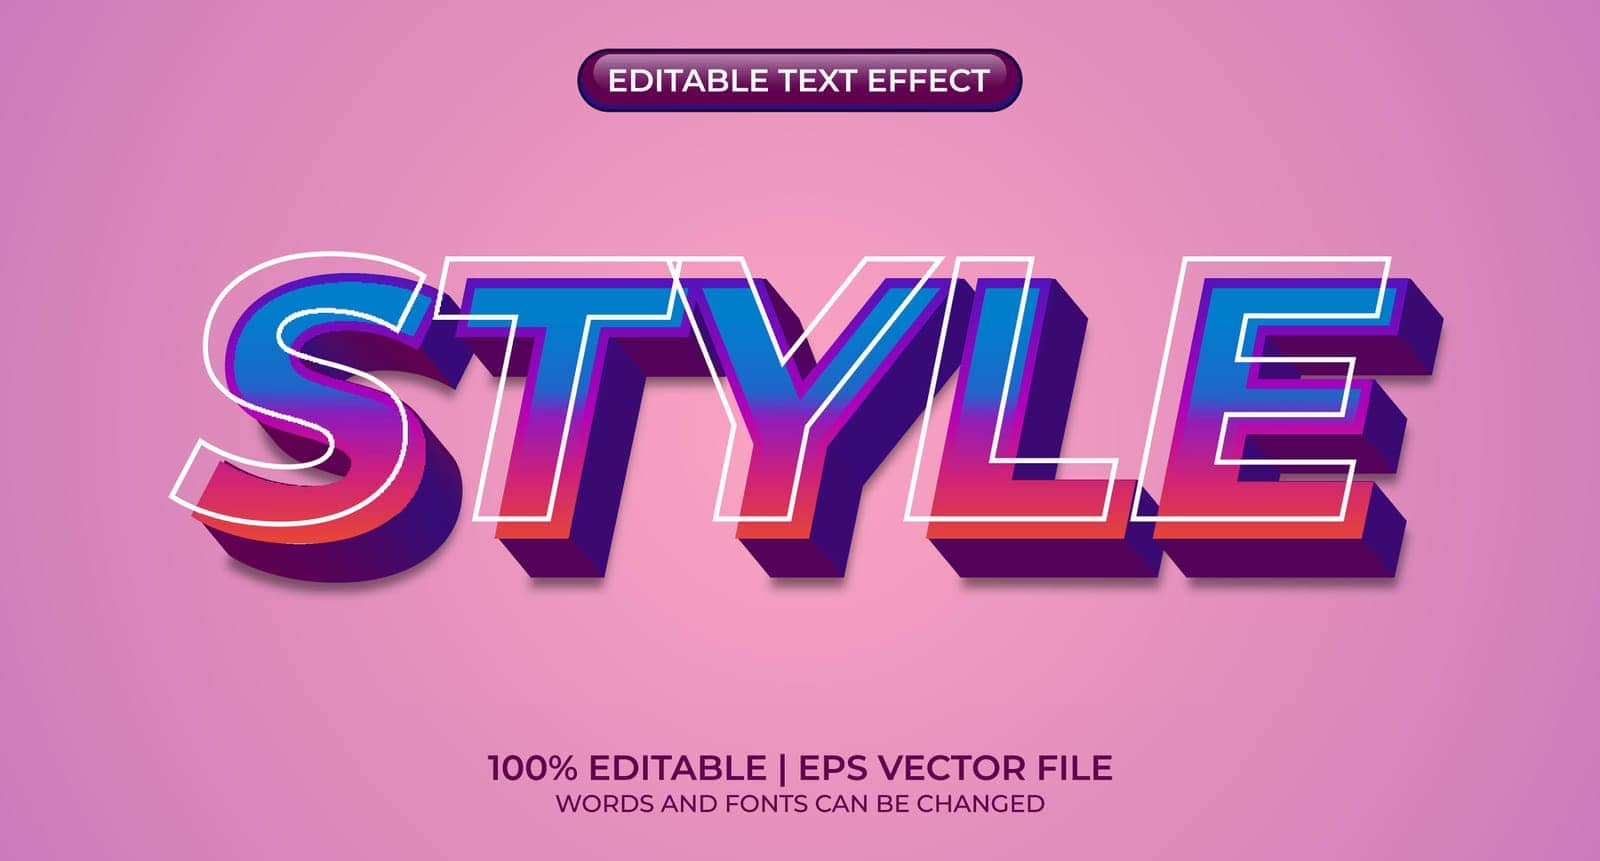 Editable text effects - Style text effects